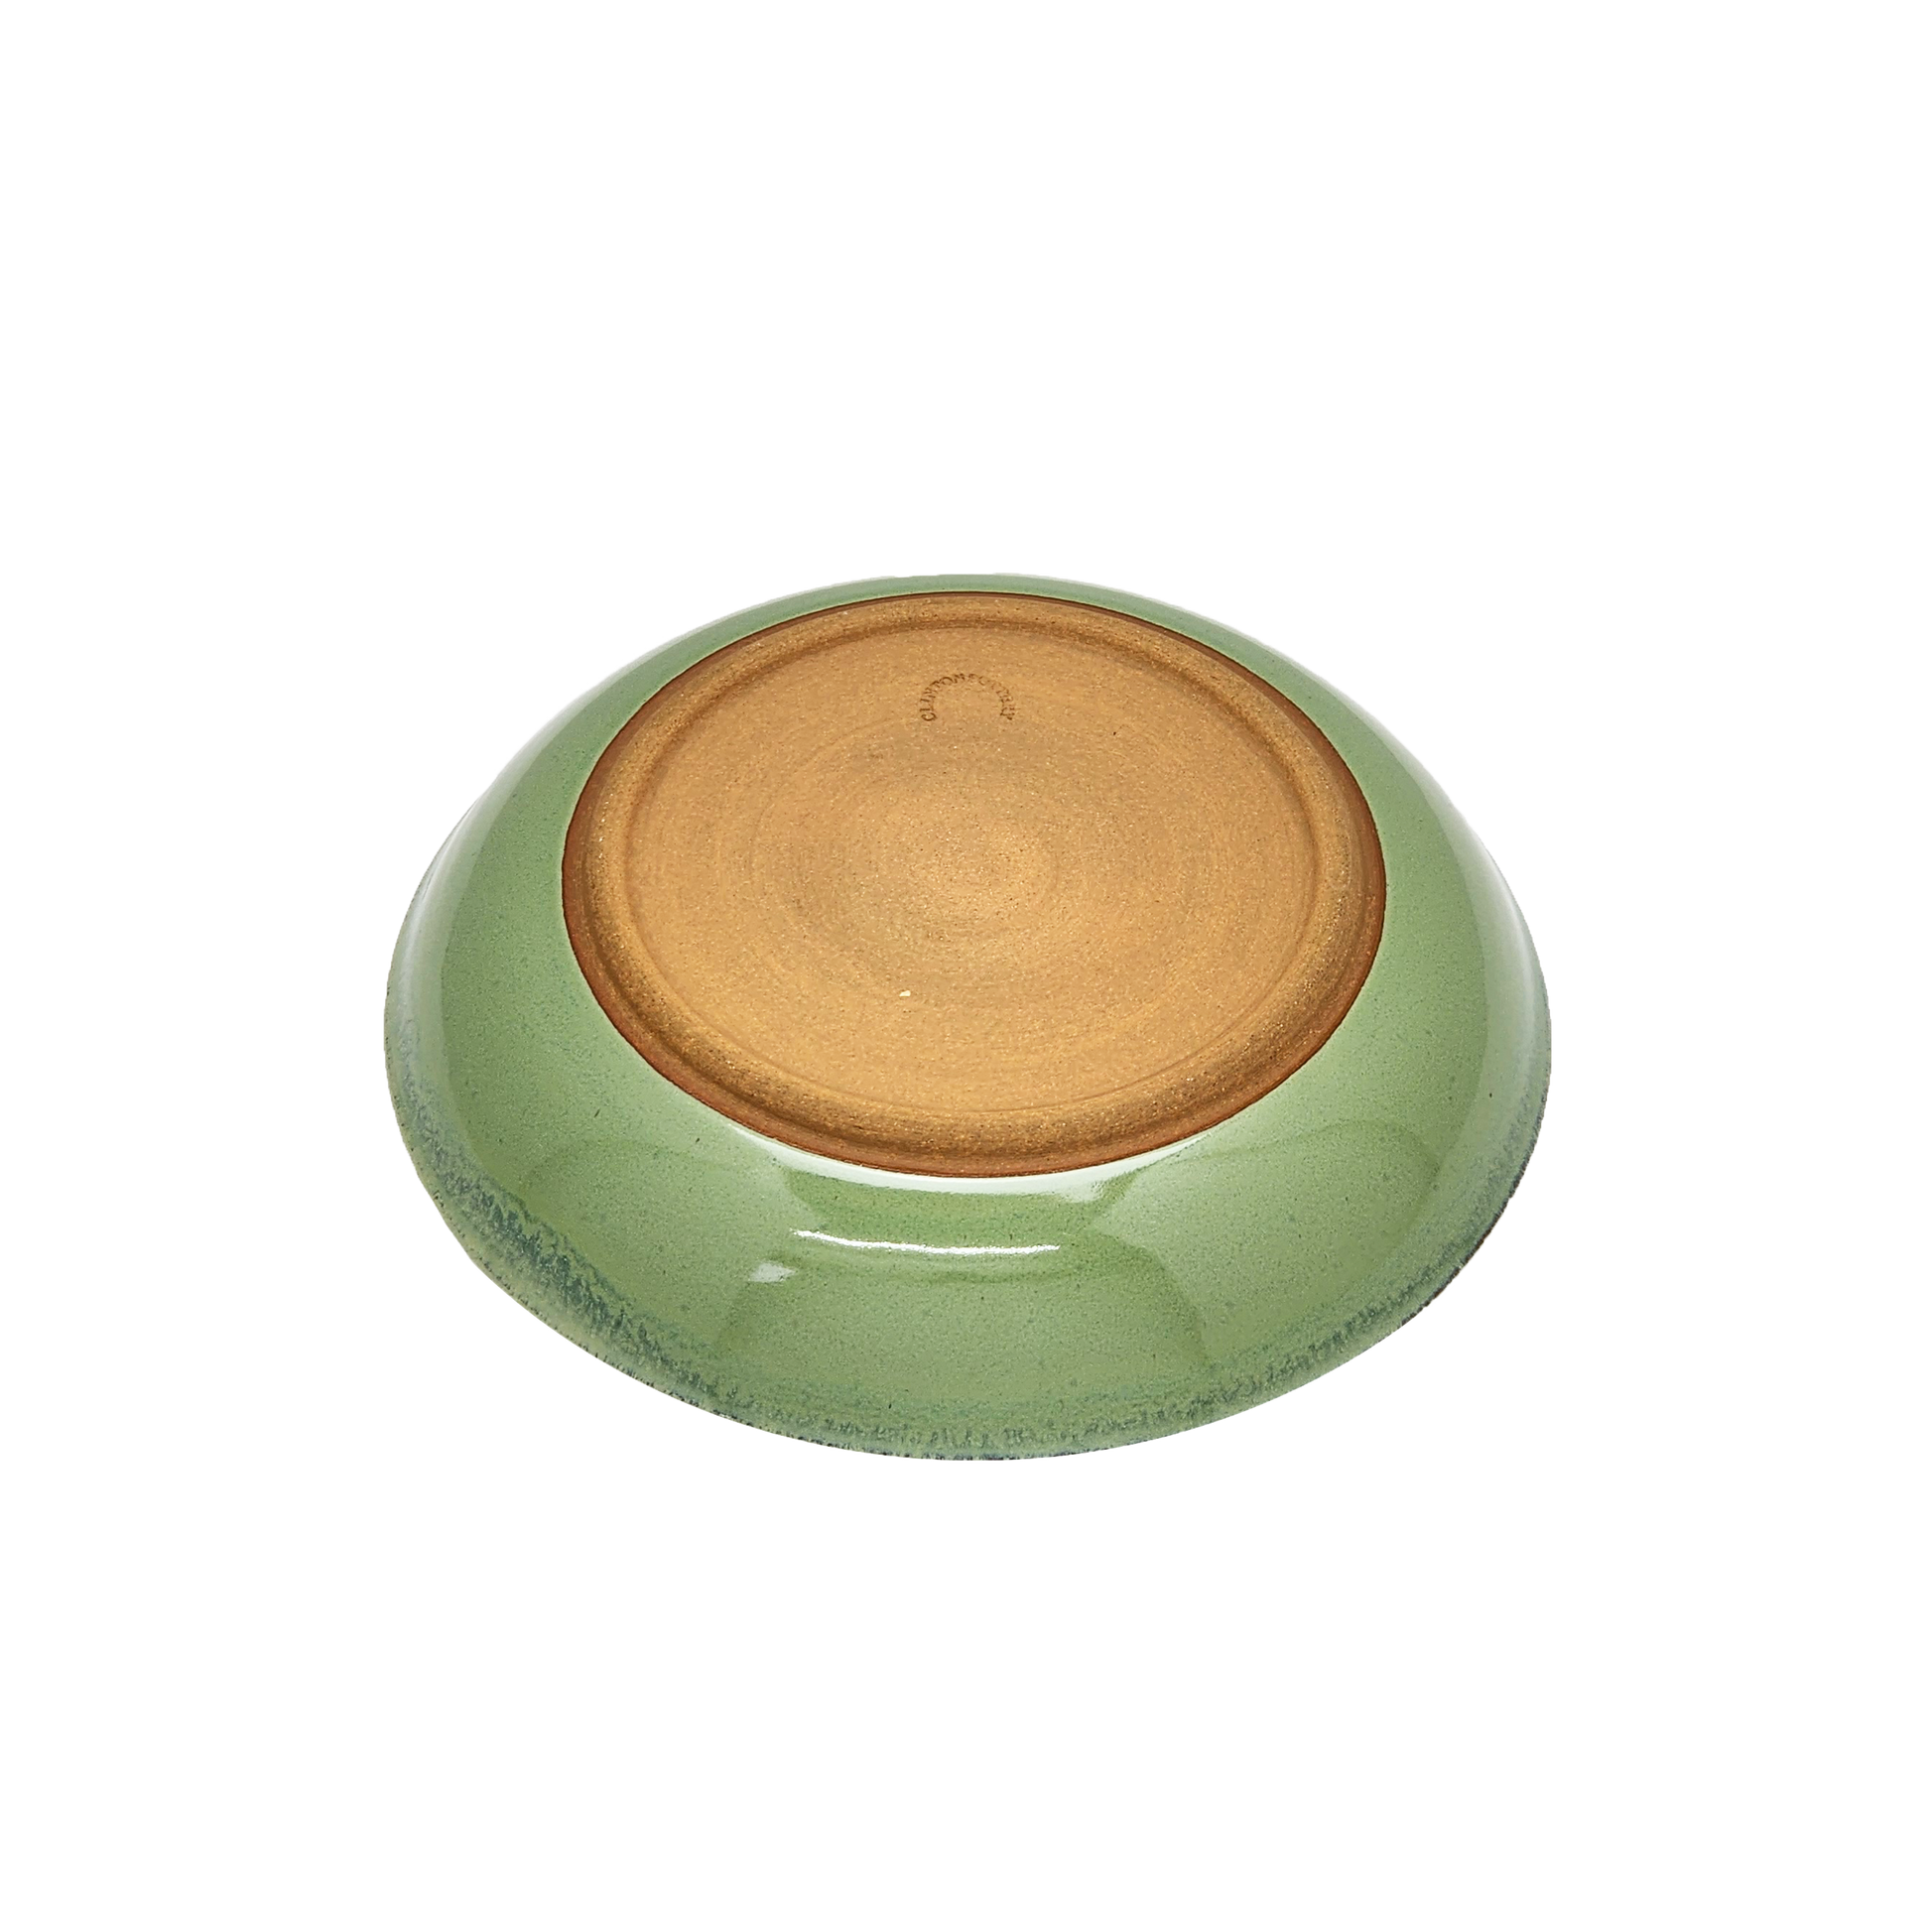 Image: A small pasta dish with a diameter of 8.5 inches, skillfully crafted by Clinton Pottery, featuring a soothing bud green glaze. The gentle green hue of the glaze evokes a sense of tranquility and freshness, making it an inviting choice for serving pasta dishes with a touch of natural elegance.